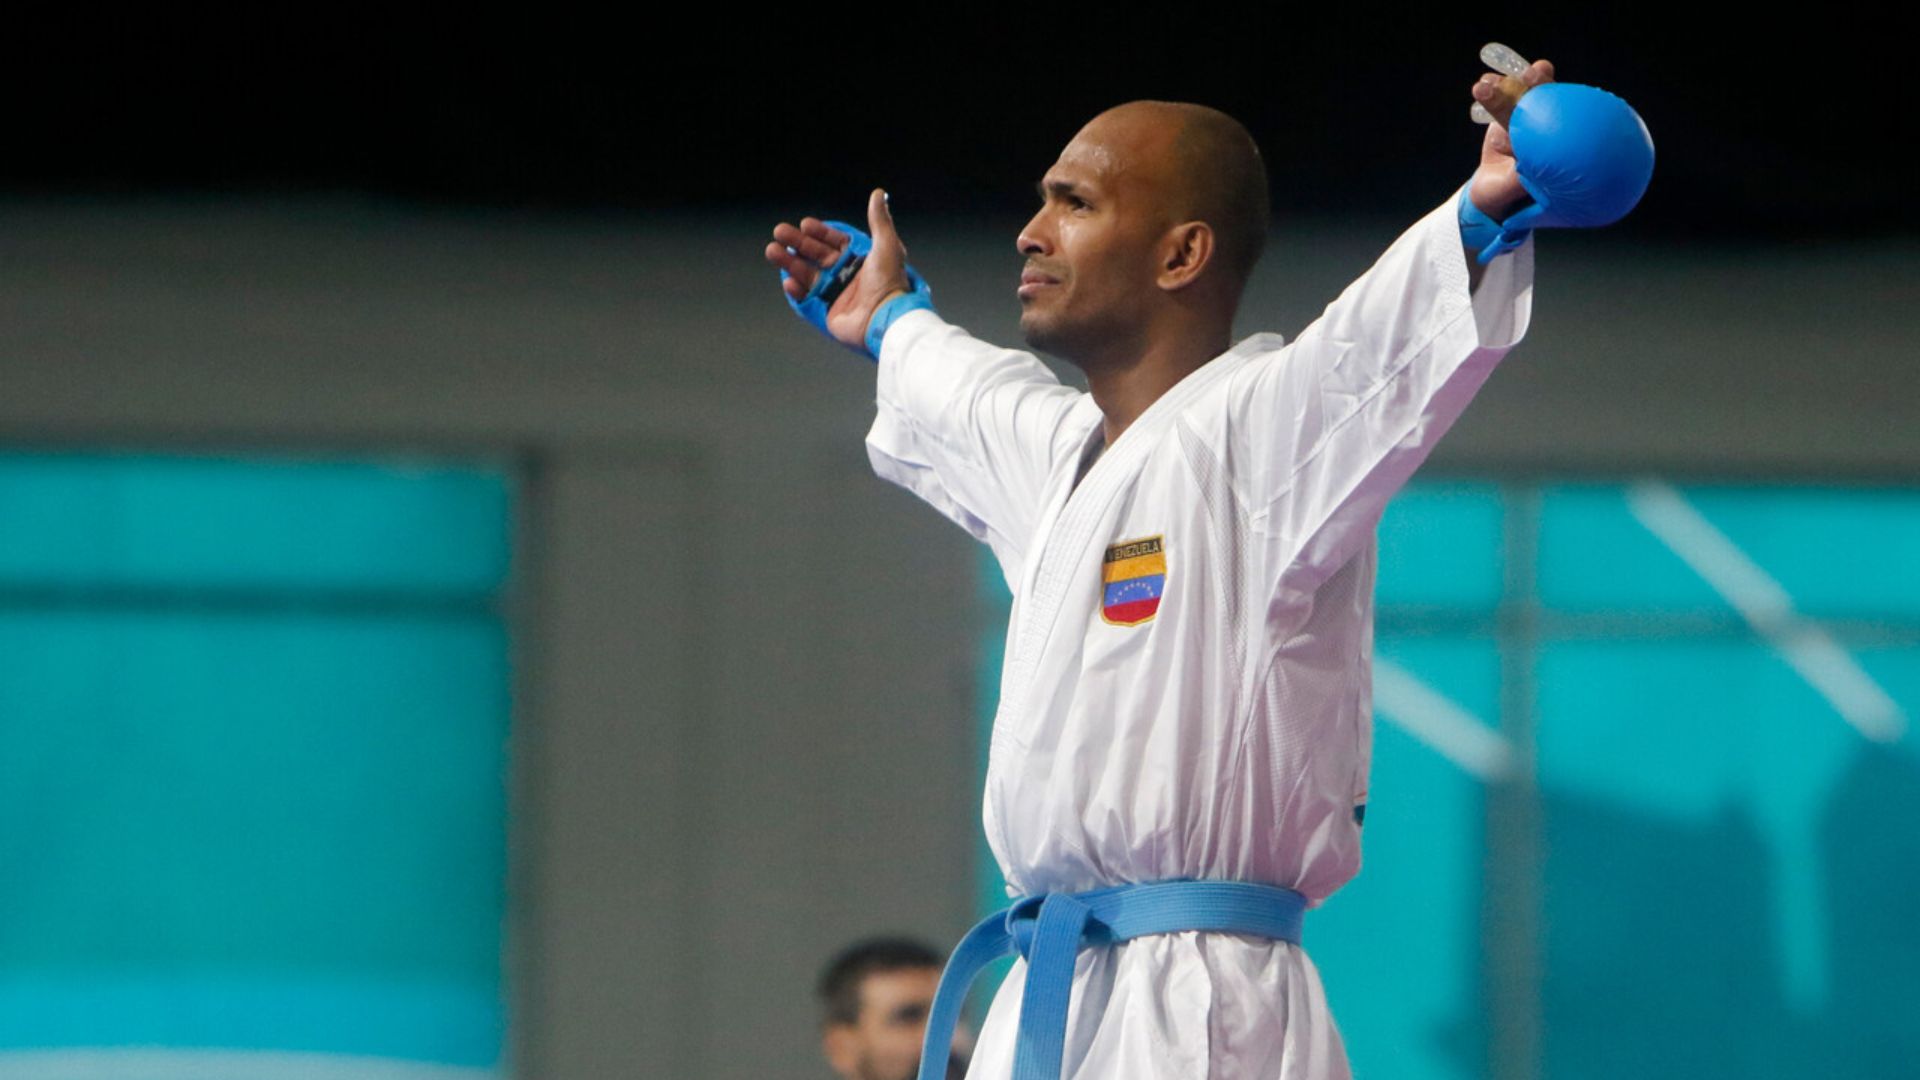 Venezuela Adds Another Gold in Karate Thanks to Andrés Madera